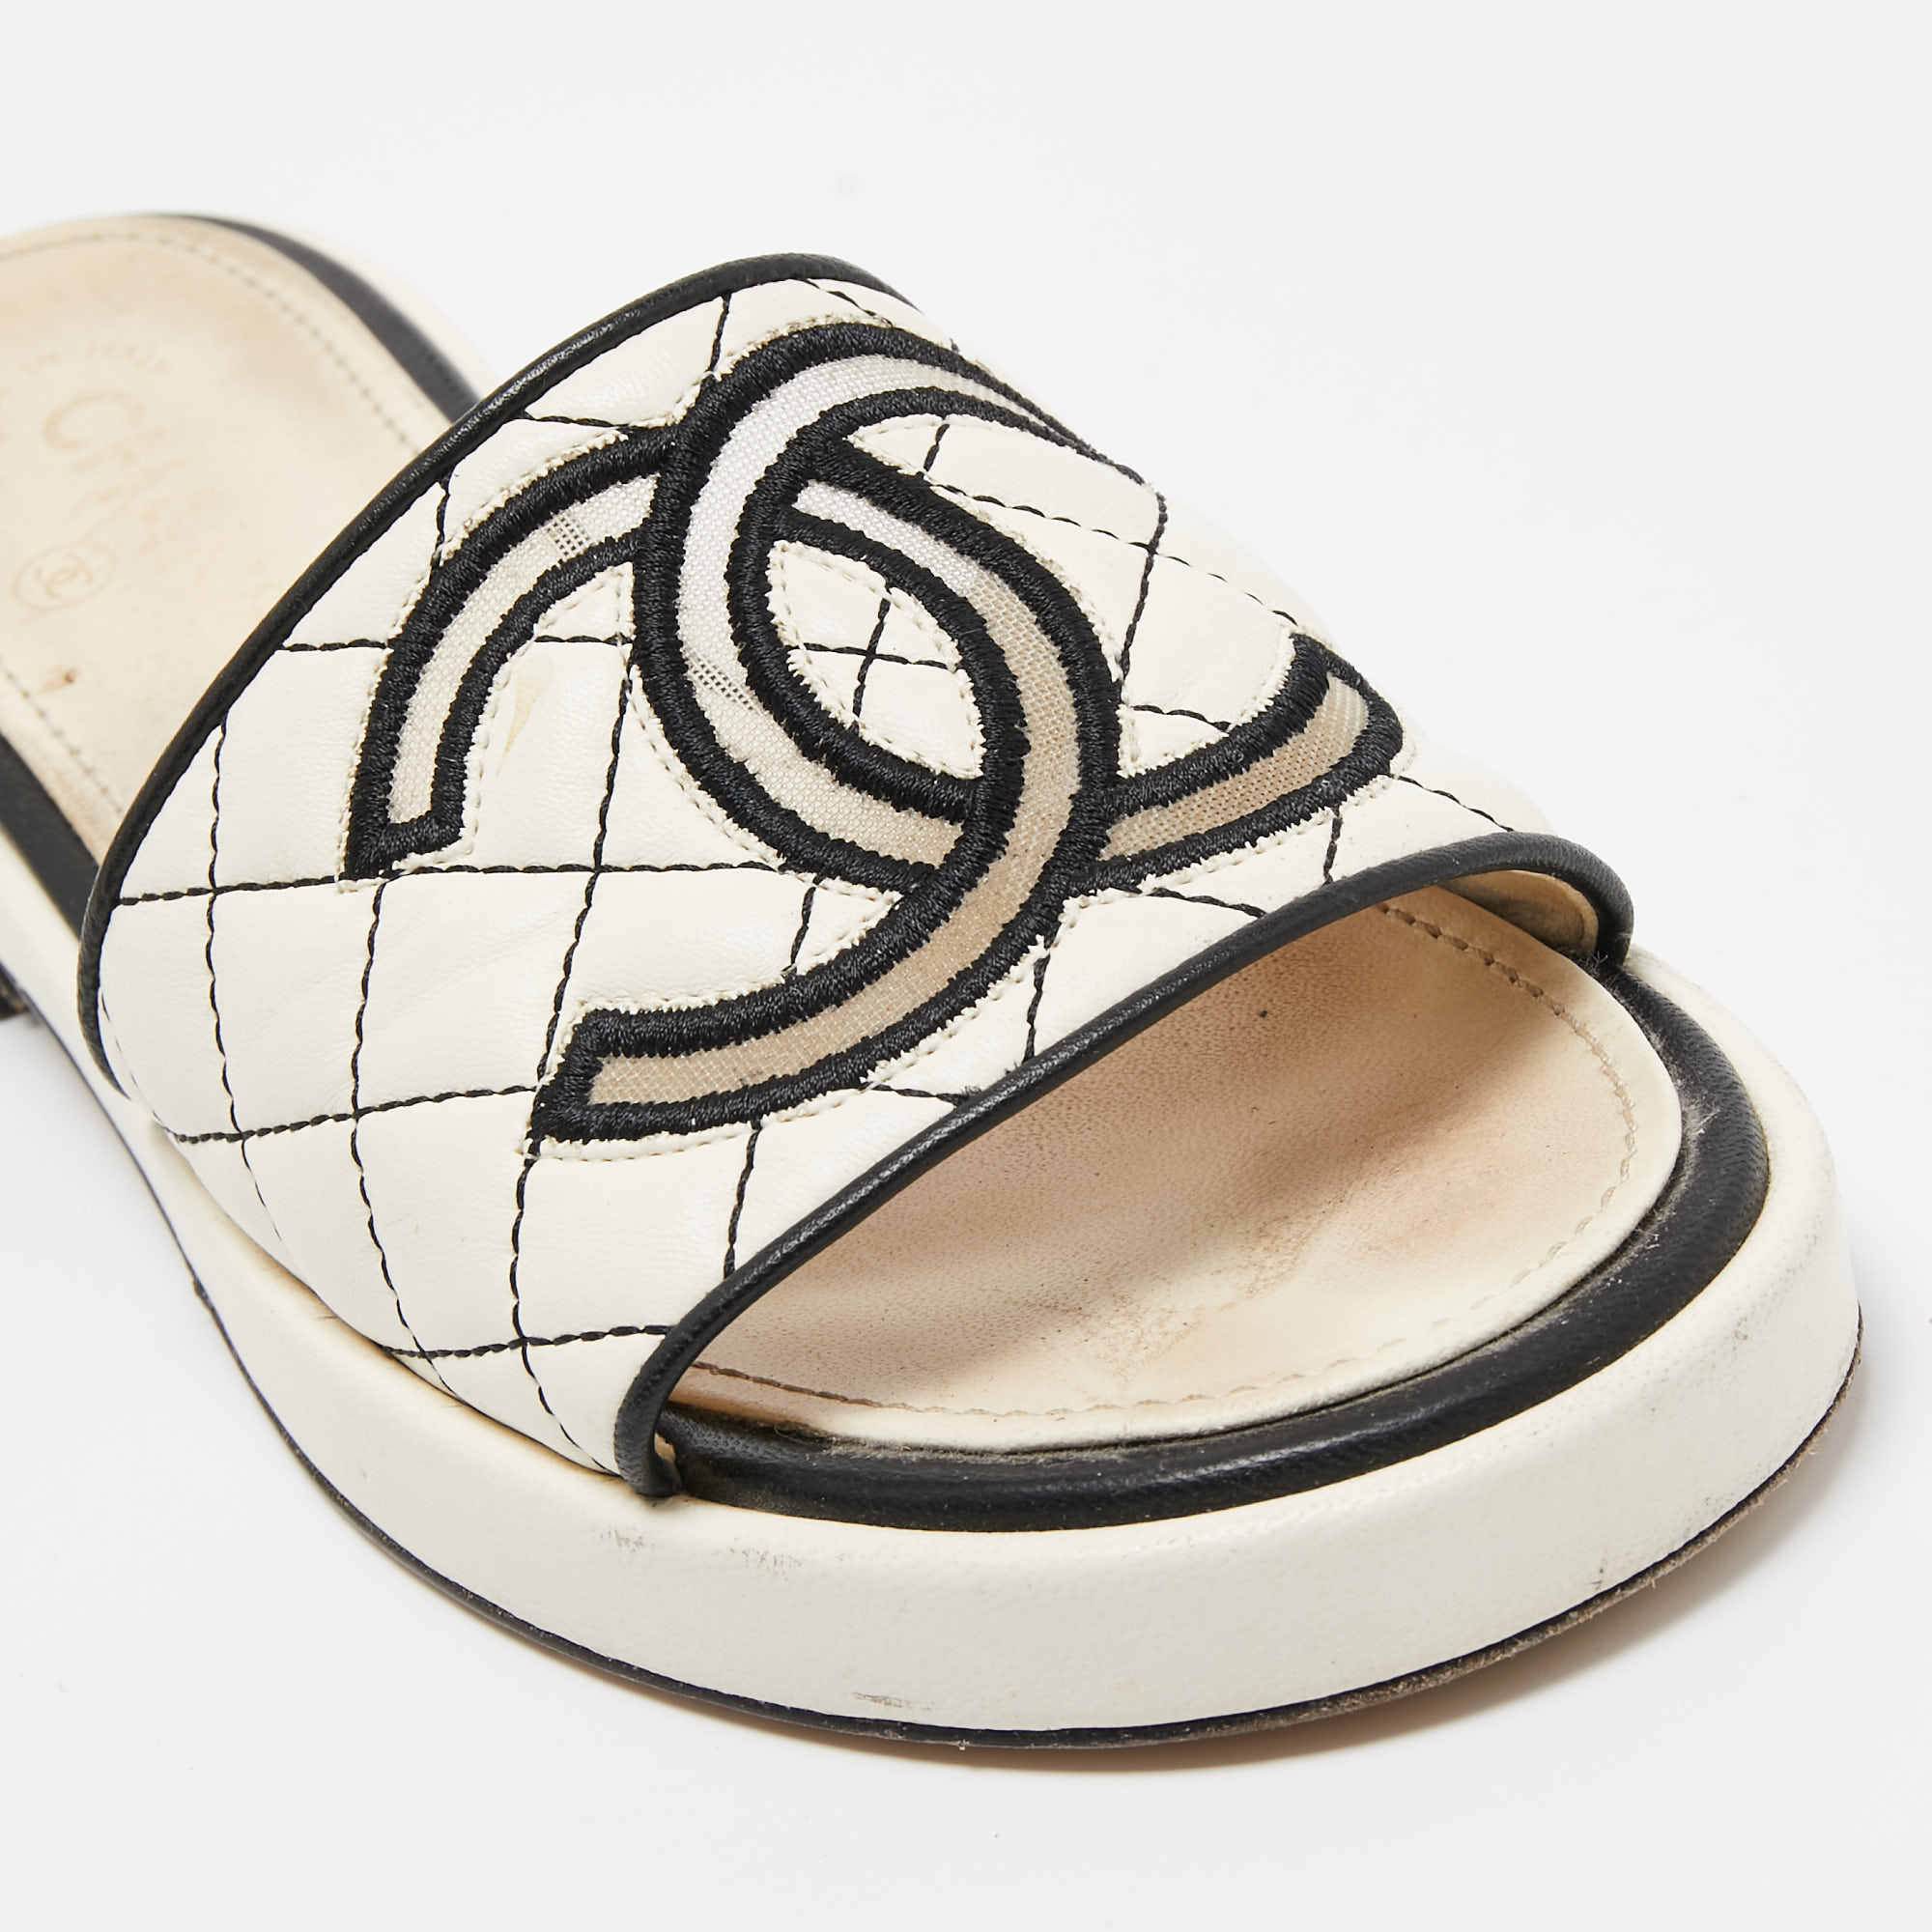 Chanel White/Black Quilted Leather CC Slide Sandals Size 38.5